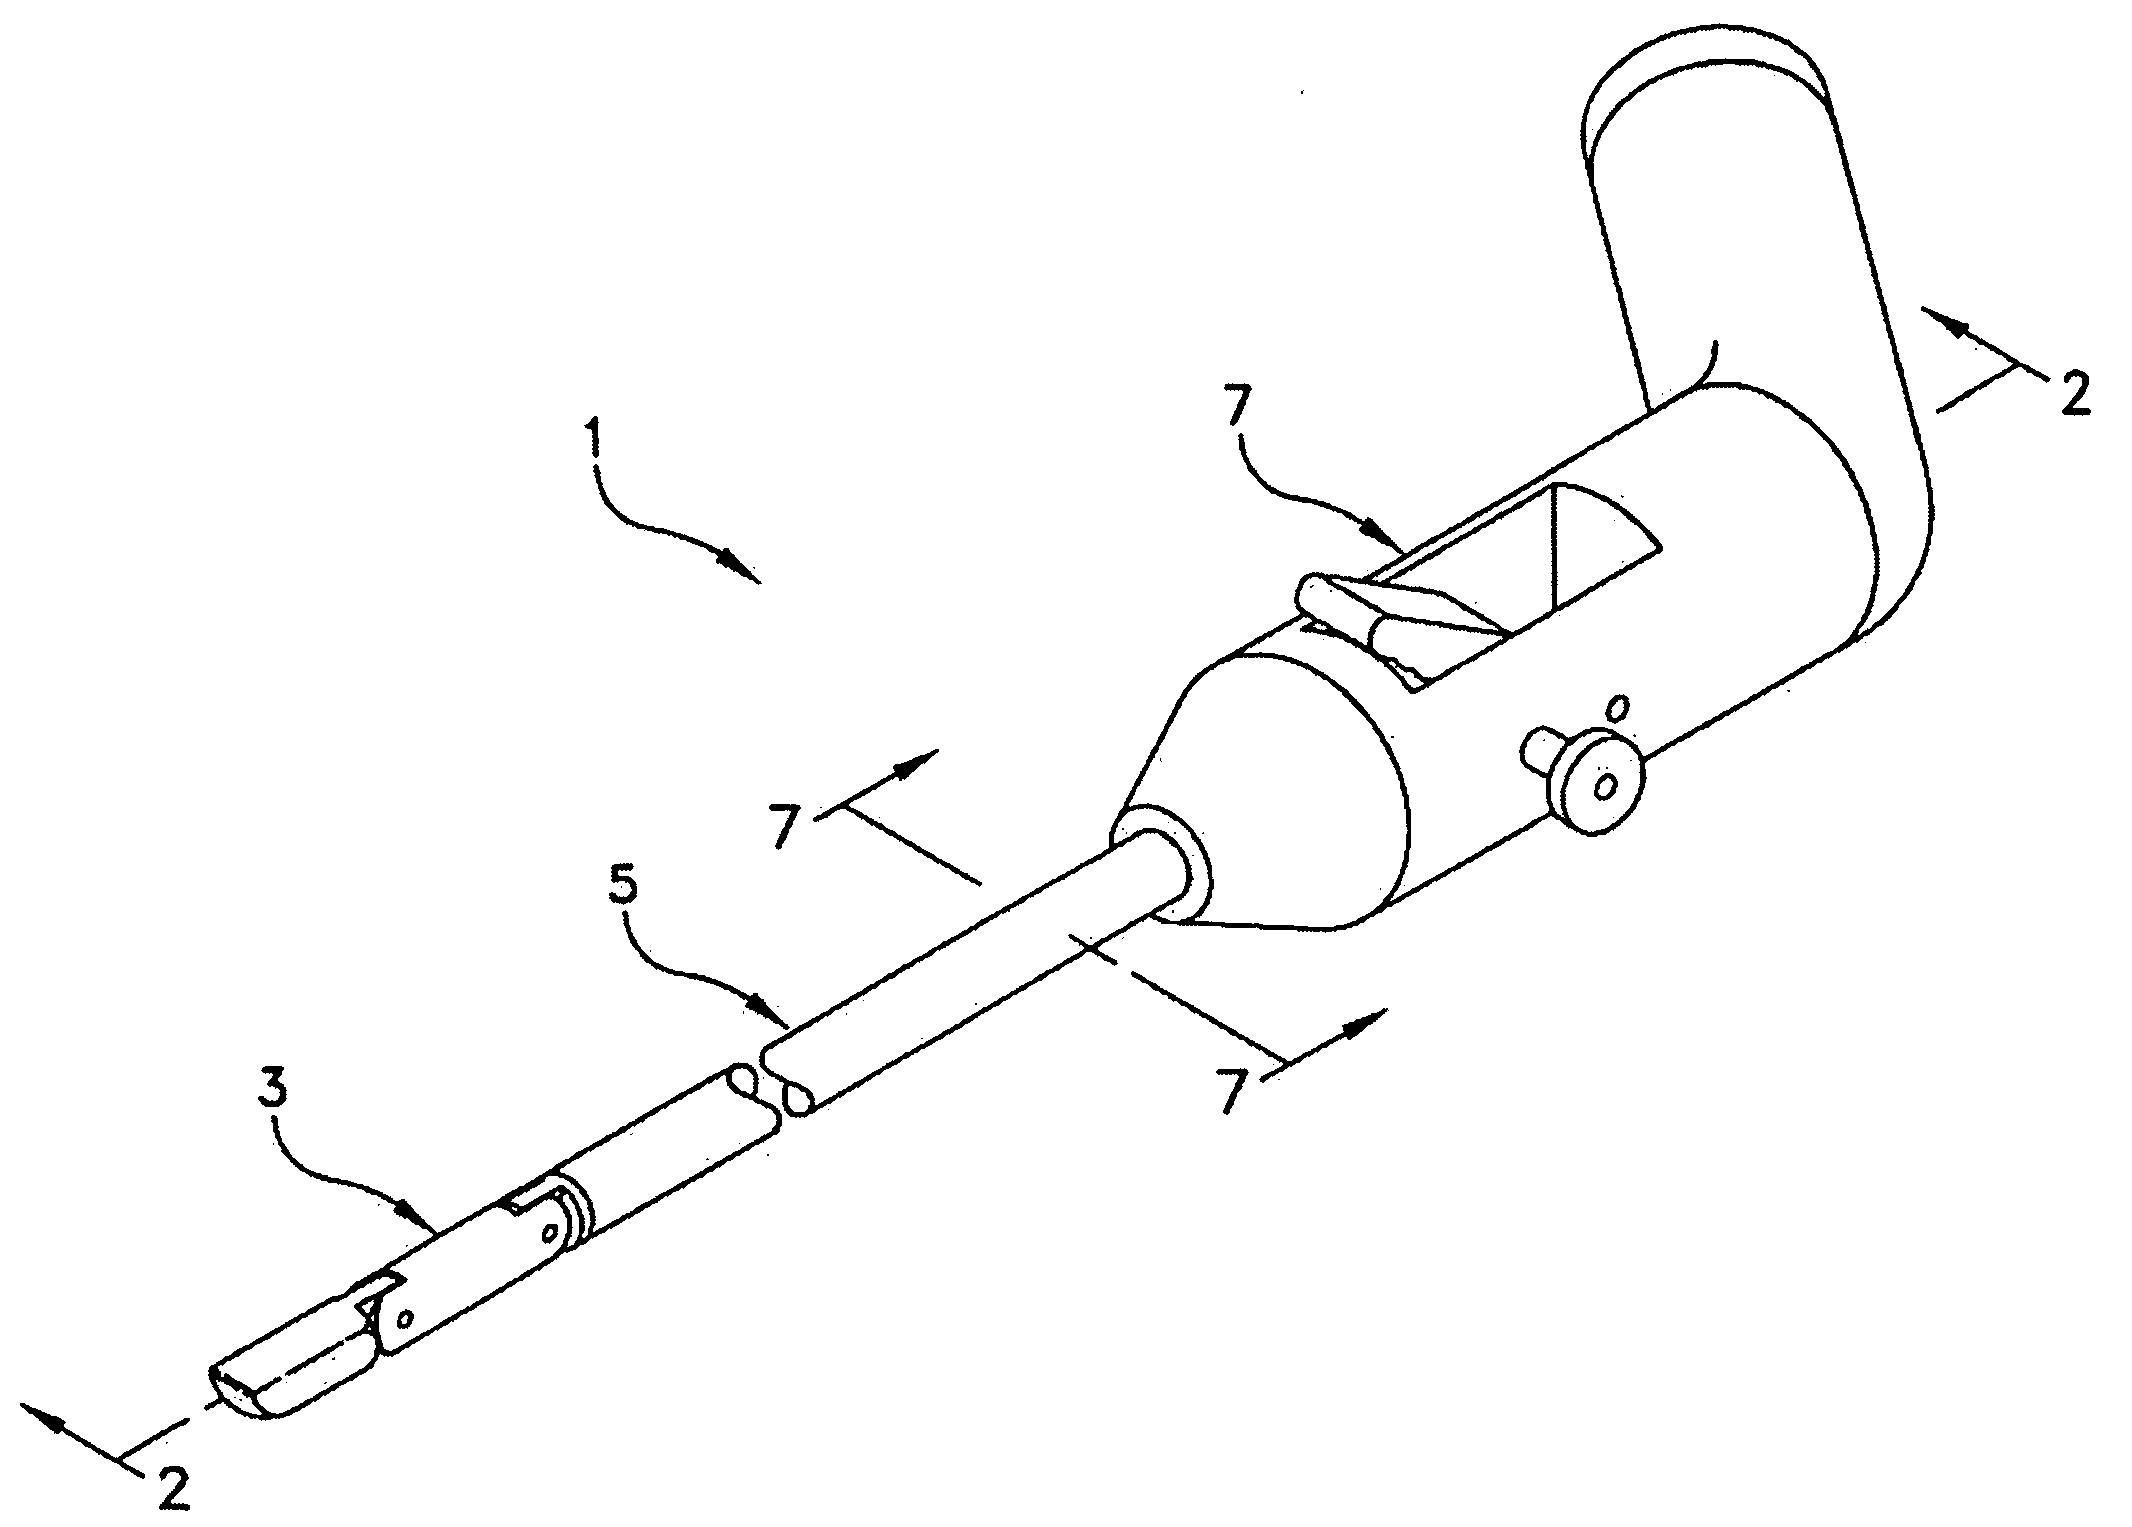 Articulated surgical probe and method for use